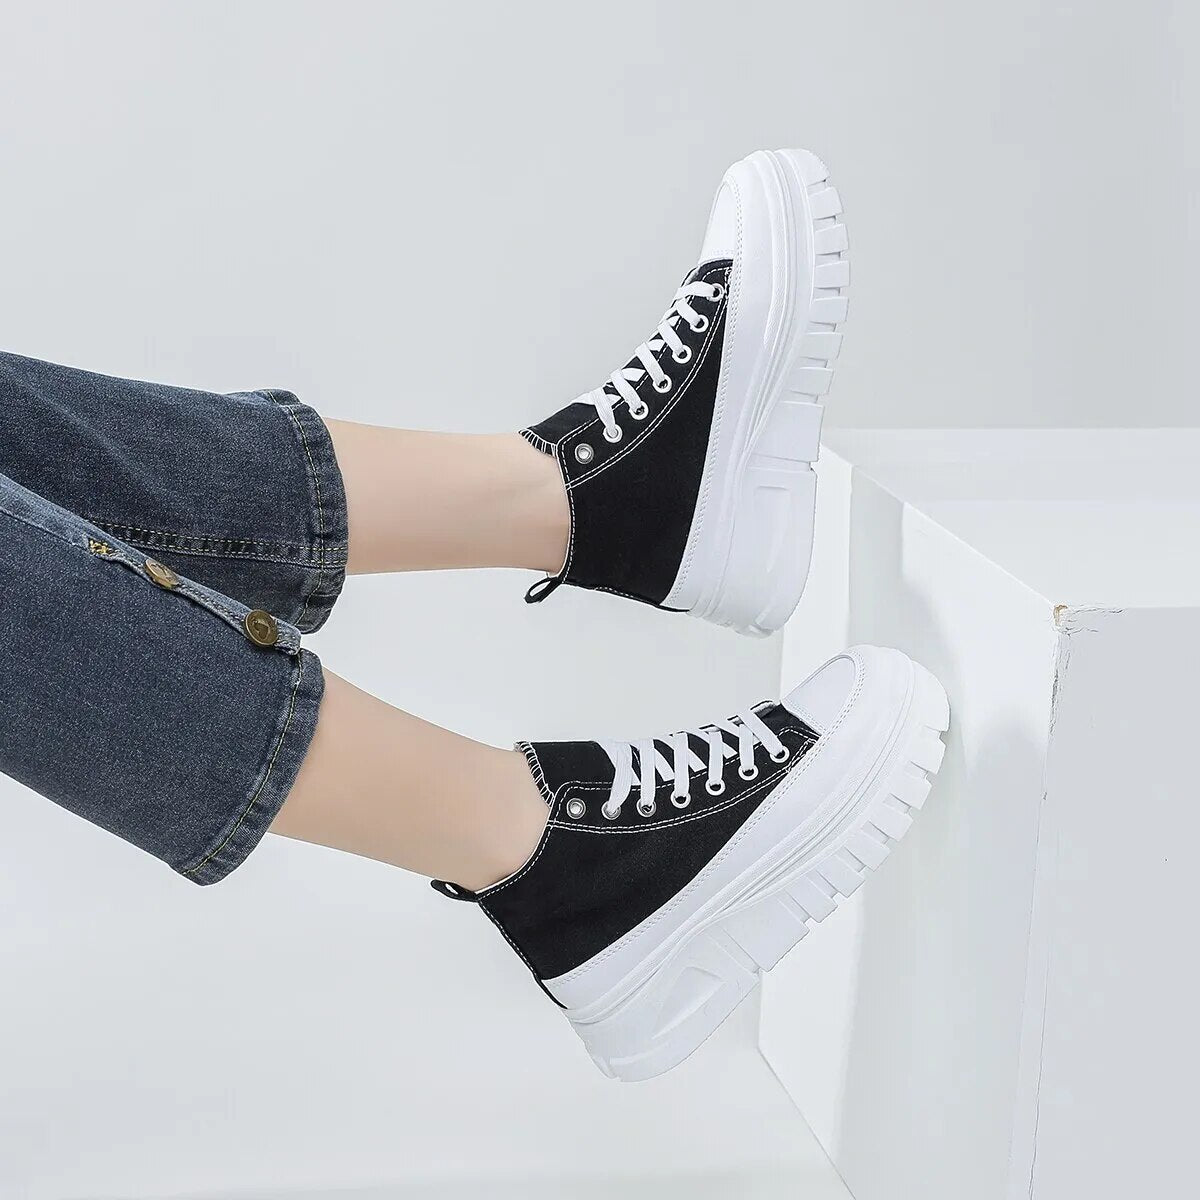 Women Lace-Up Front High Top Flatform Canvas Shoes Fashion Casual Comfortable Height Increasing Sneakers - TaMNz